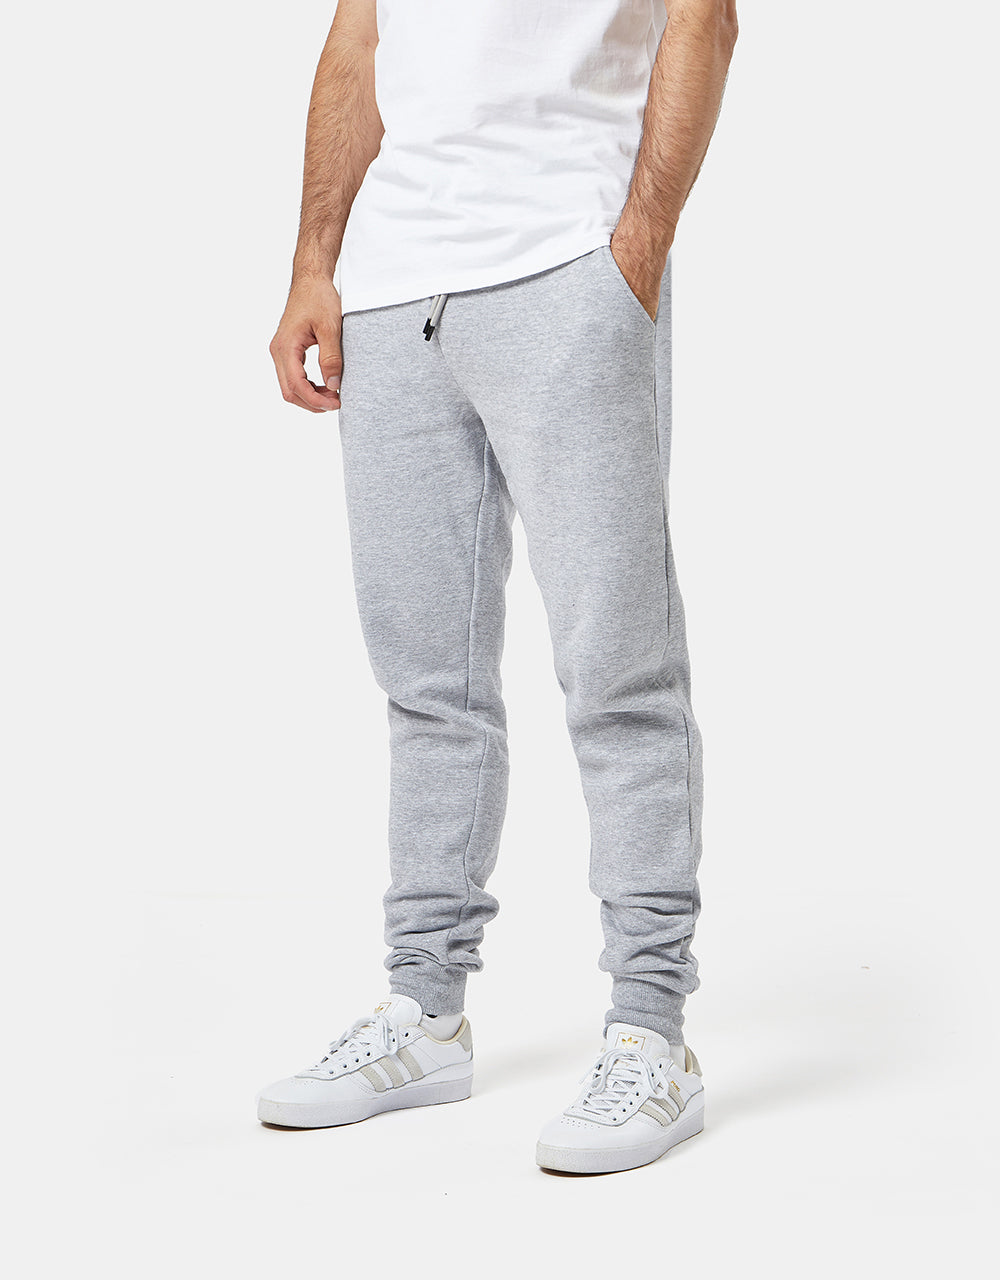 Route One Essential Sweatpant - Heather Grey